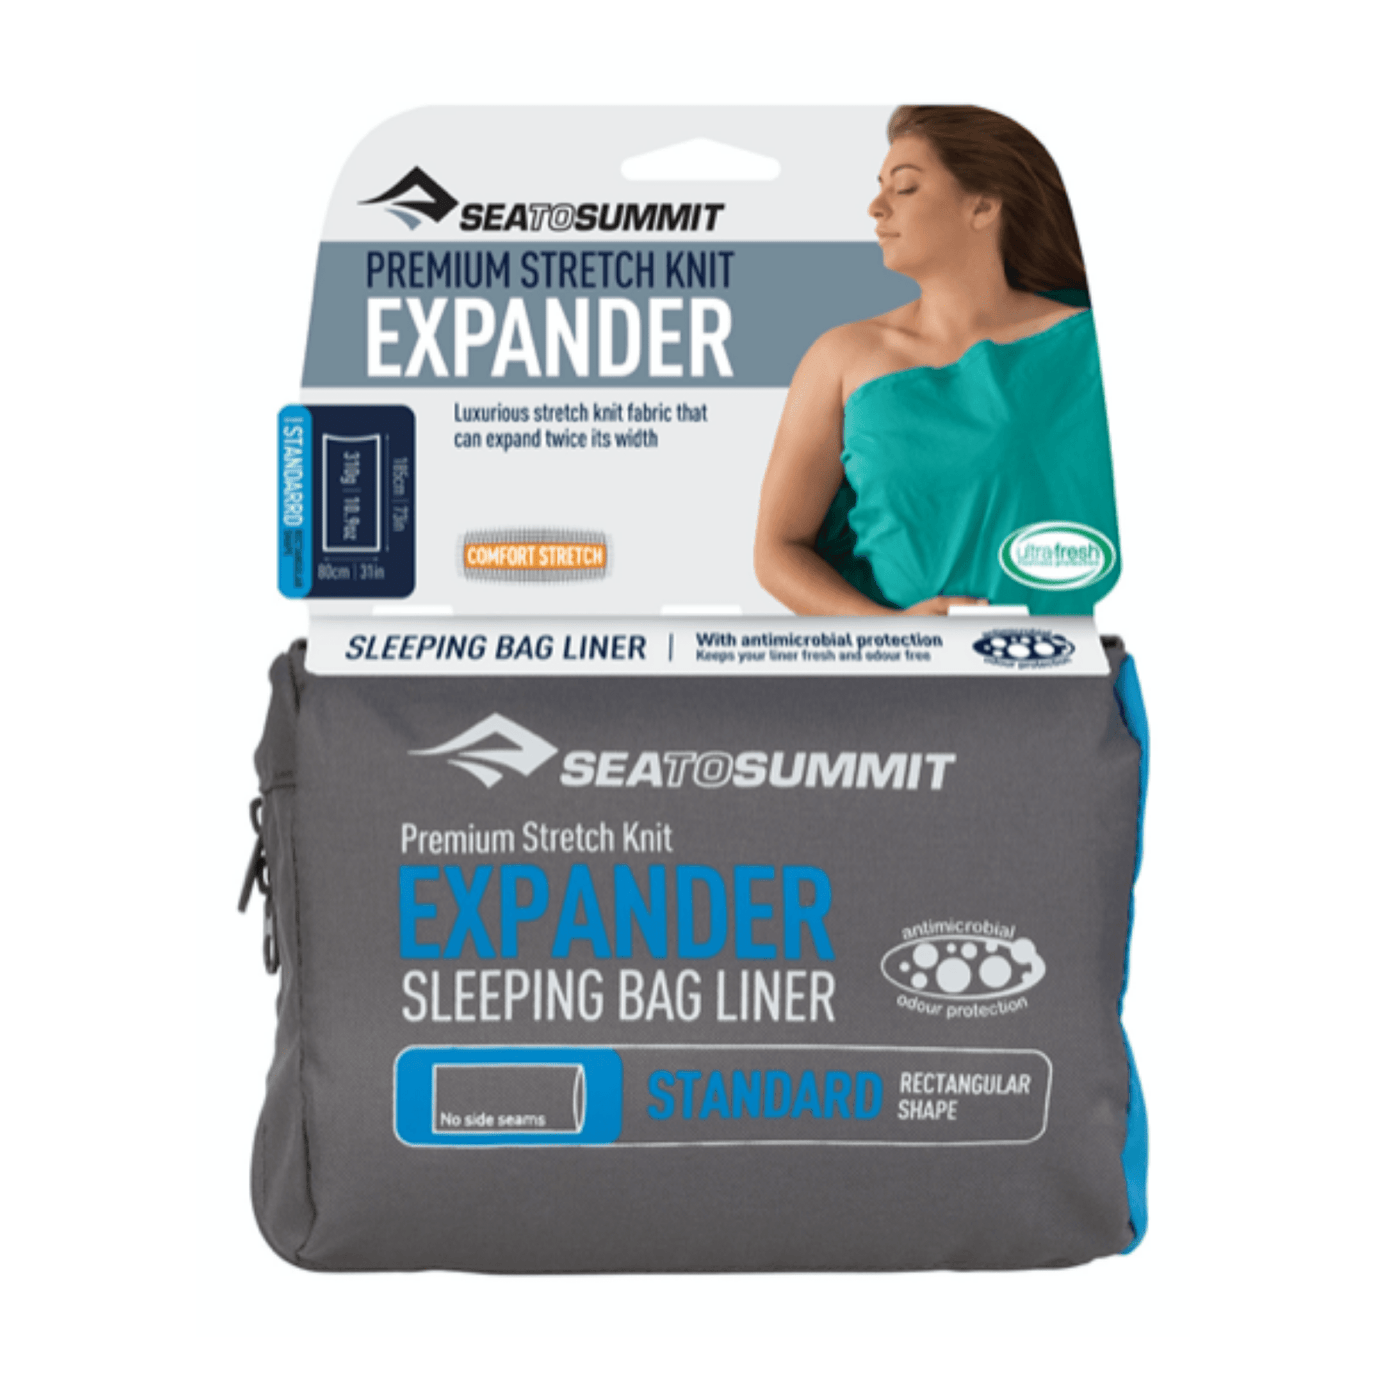 Sea to Summit Premium Stretch Expander Liner | Sleeping Bag Liner NZ | Further Faster NZ